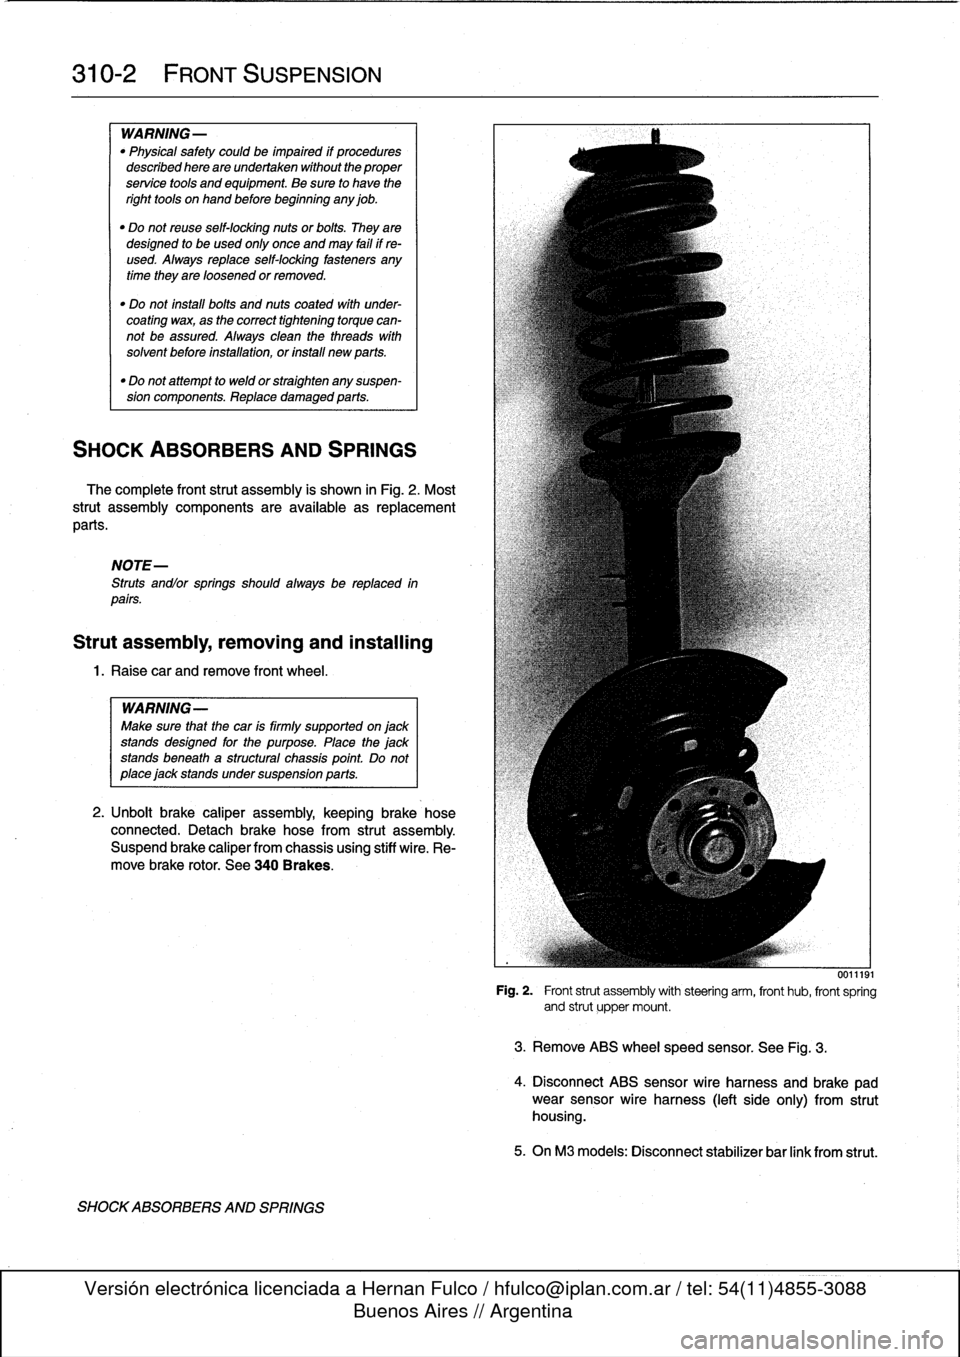 BMW 318i 1997 E36 User Guide 
310-2

	

FRONT
SUSPENSION

WARNING-

"
Physical
safety
could
be
impaired
if
procedures
described
here
areundertaken
without
the
proper
service
tools
and
equipment
.
Be
sure
to
have
the
right
tools
o